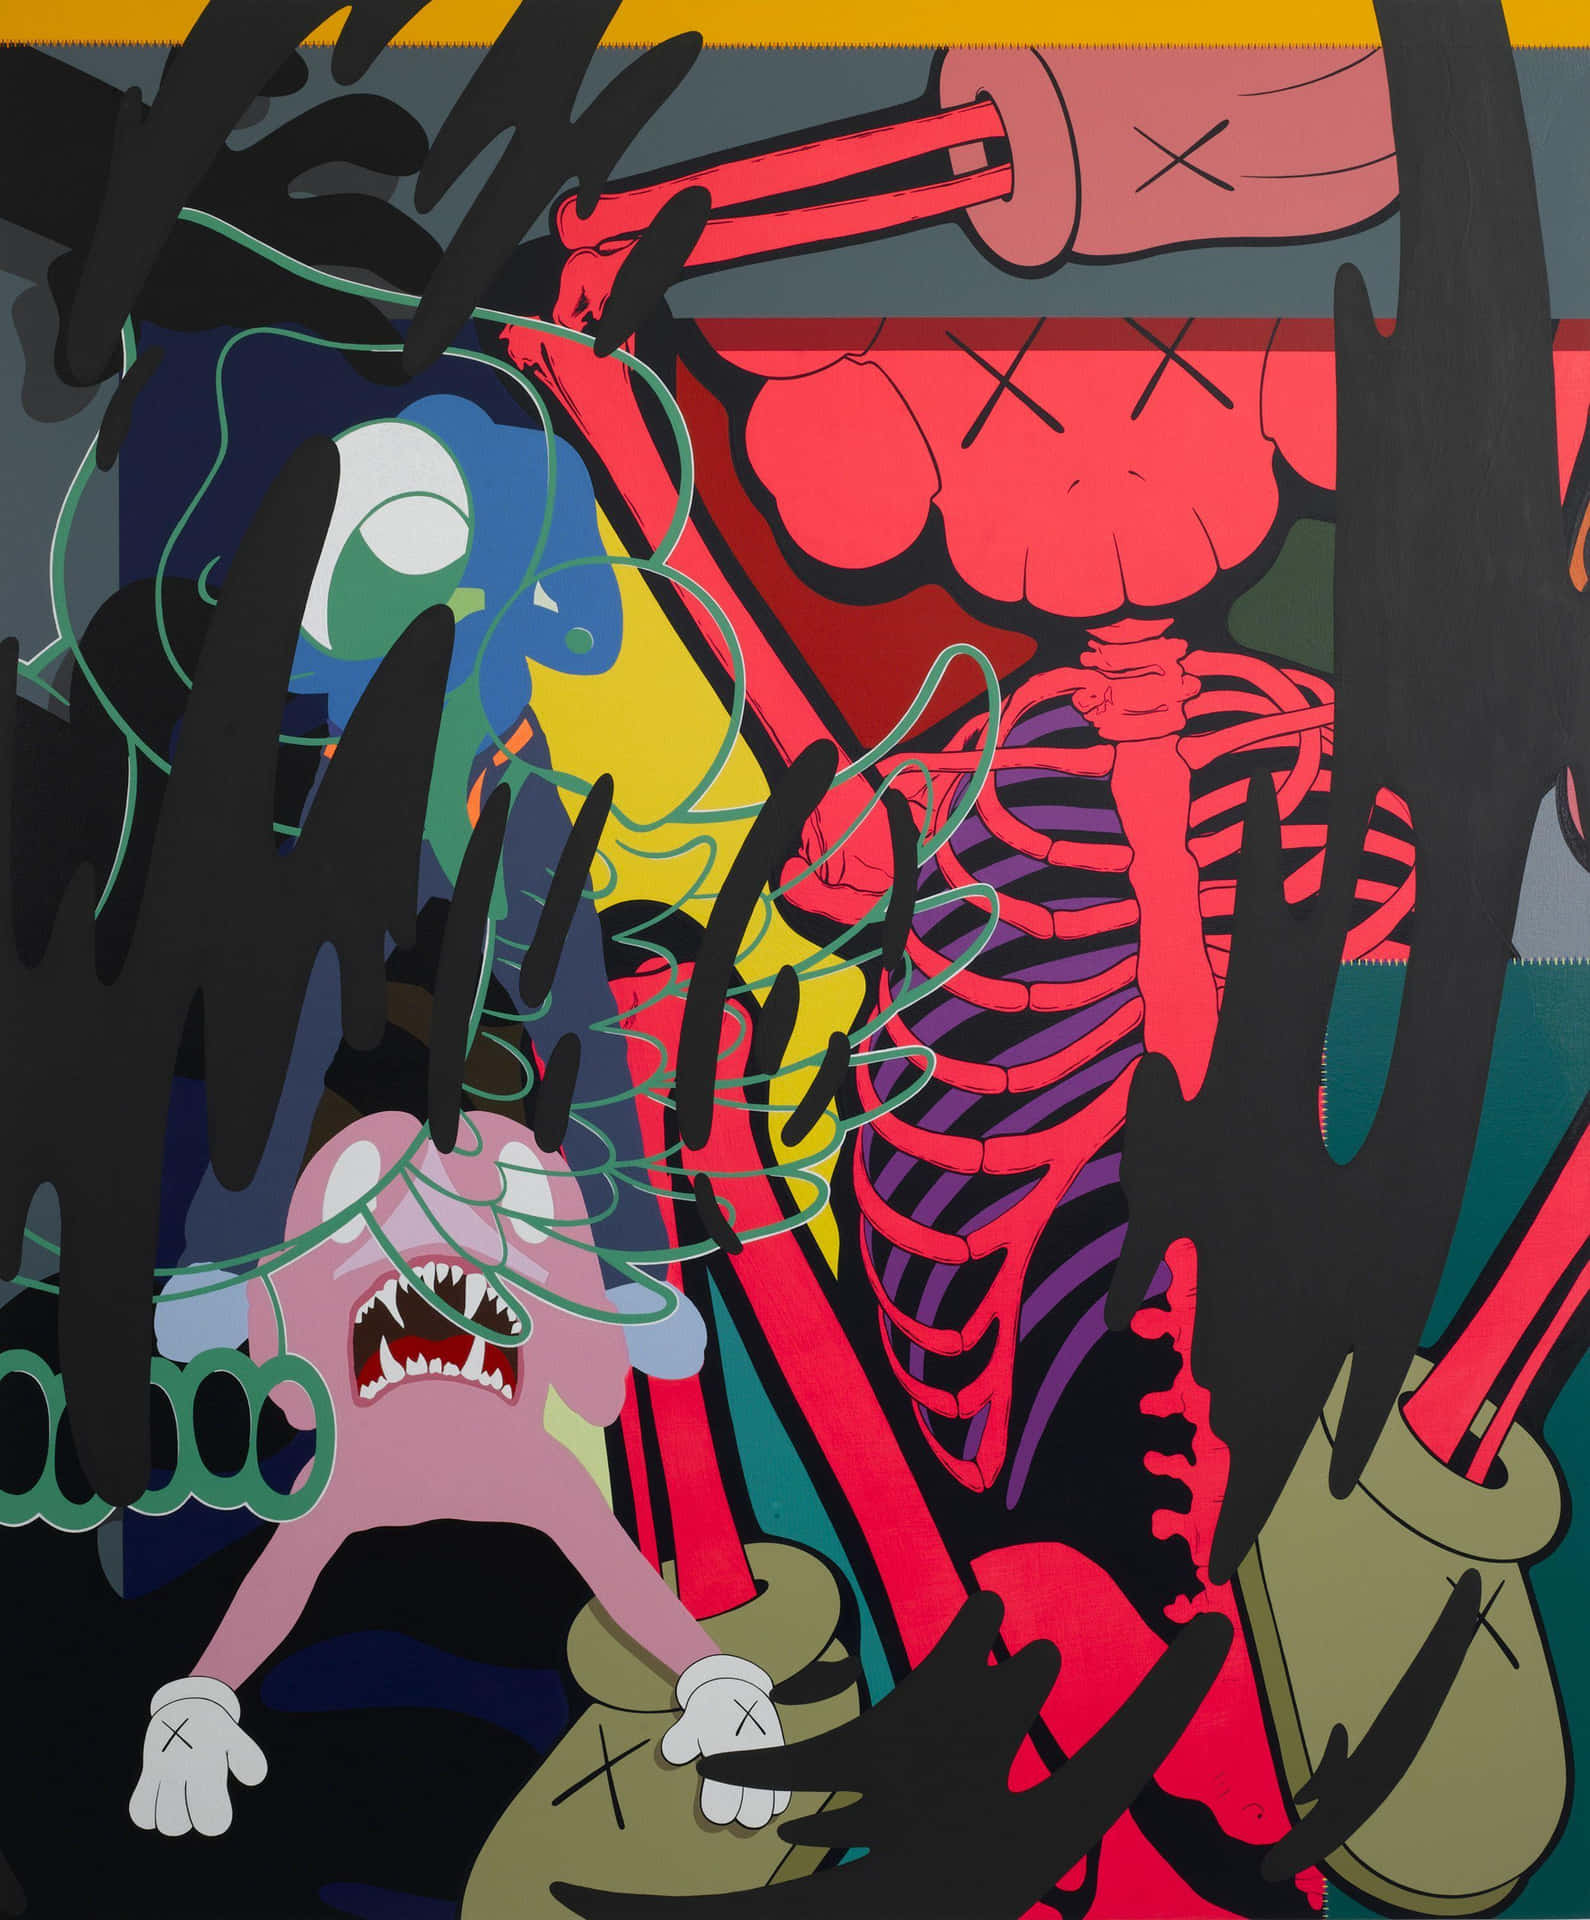 Caption: The Artistic Universe Of Kaws - Immersed In Colors And Shapes